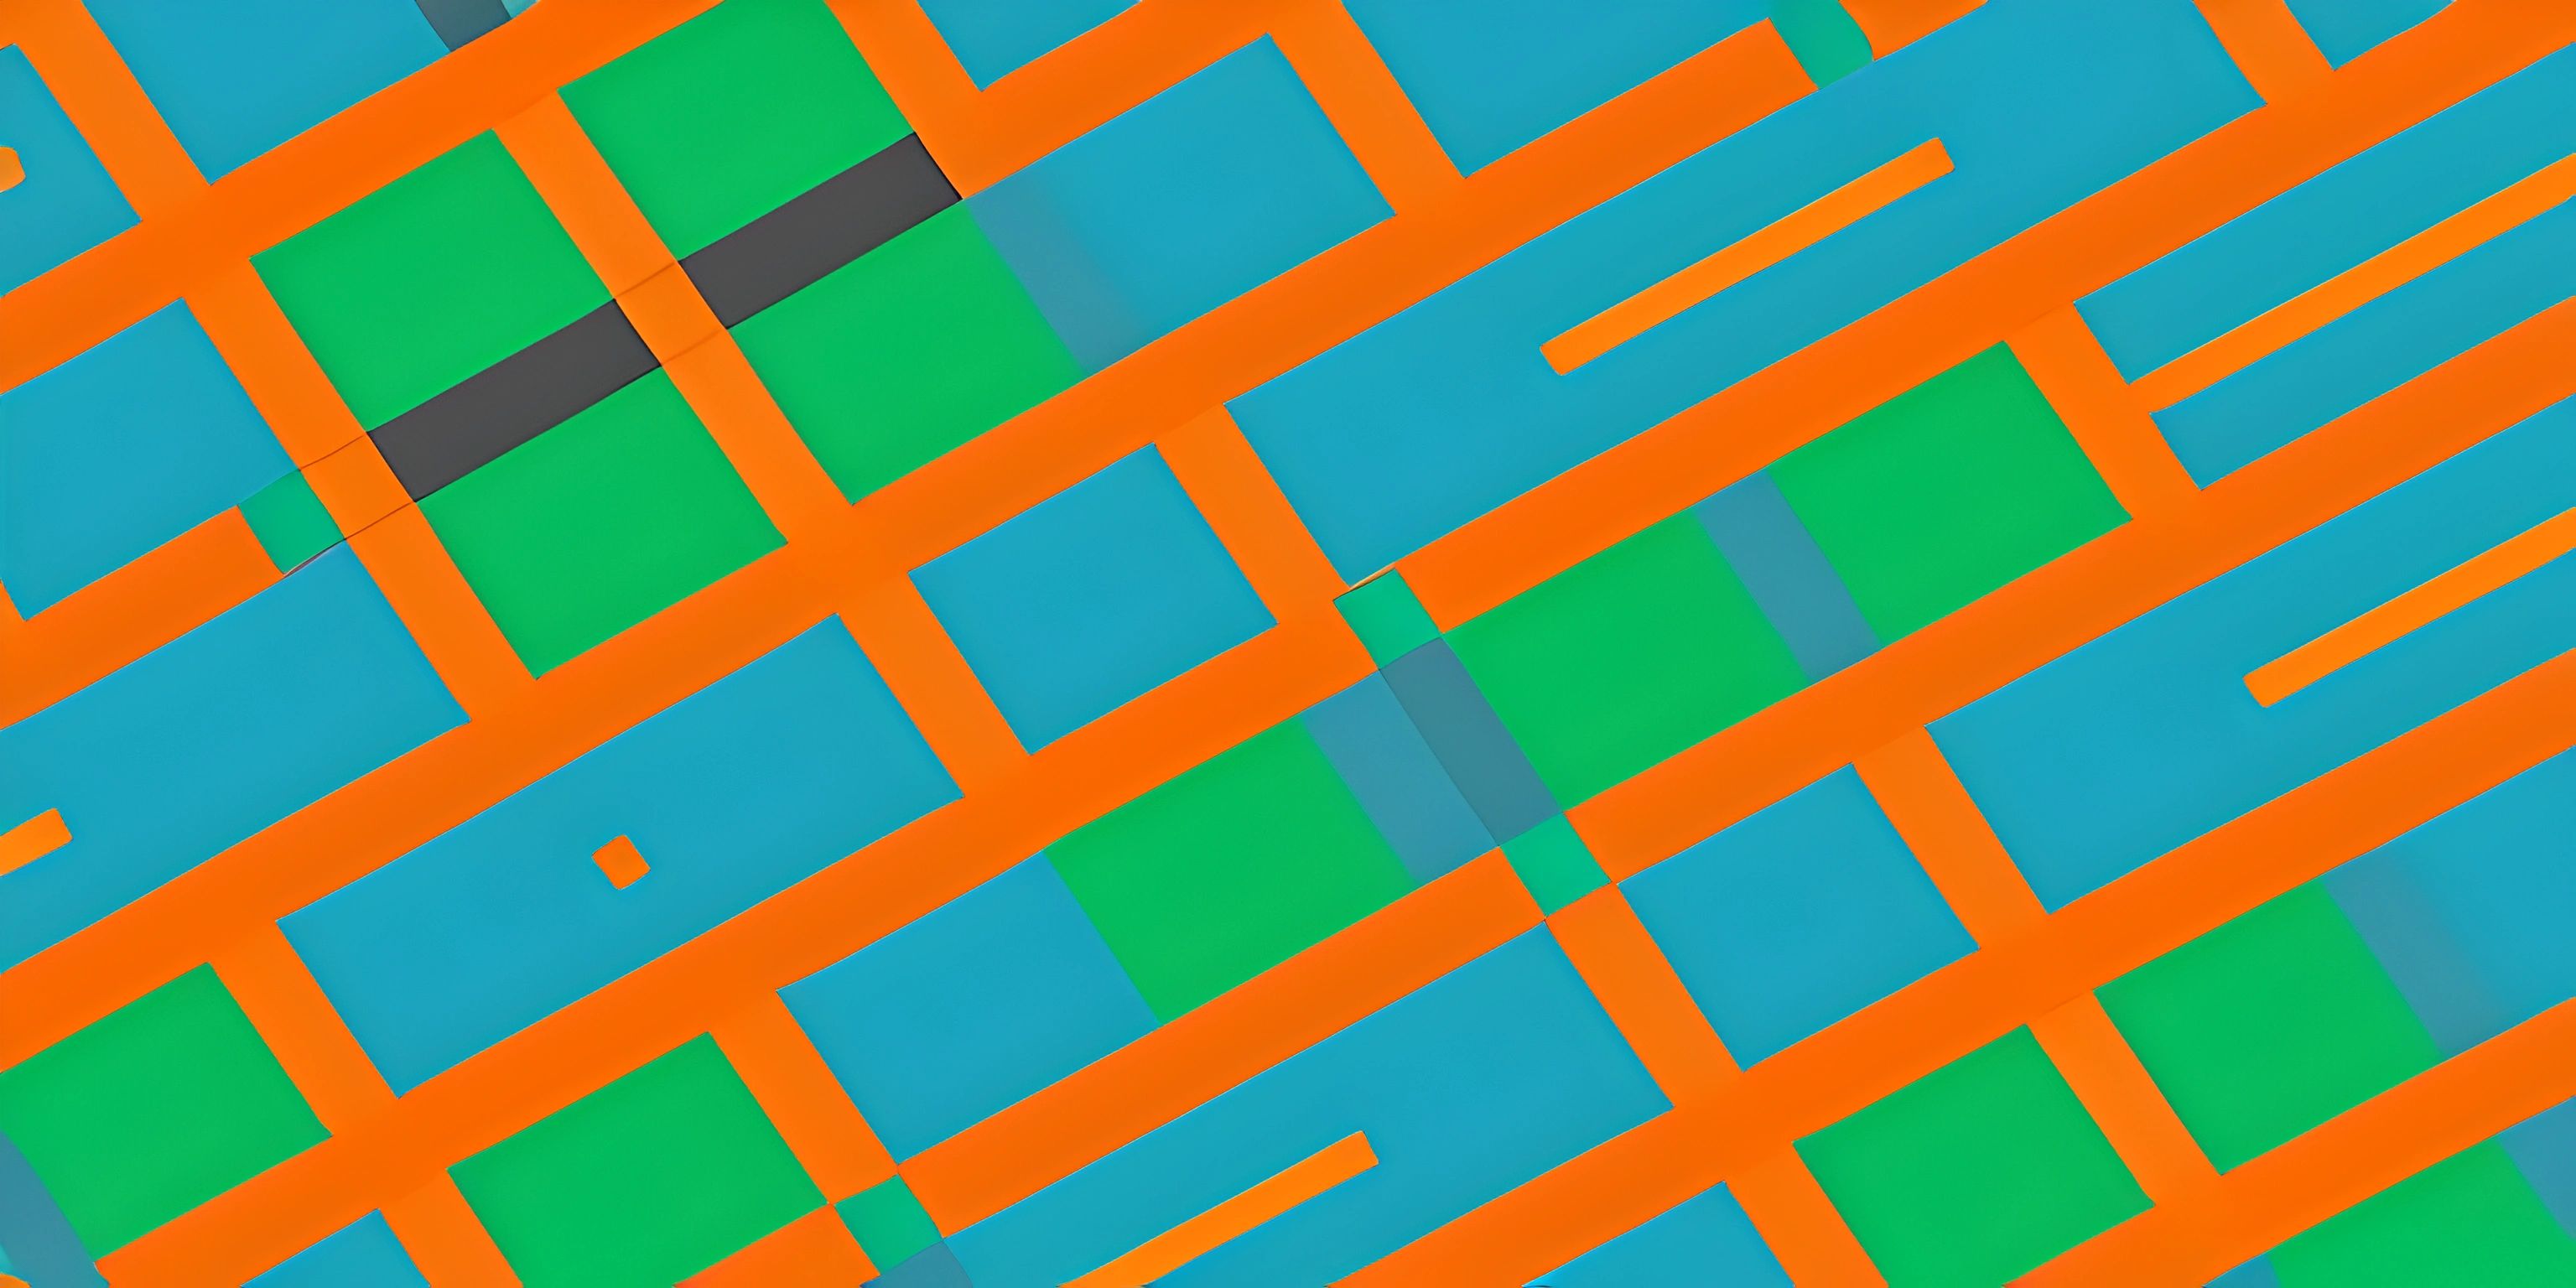 the background is made up of multicolored squares and lines, with black corners to the bottom